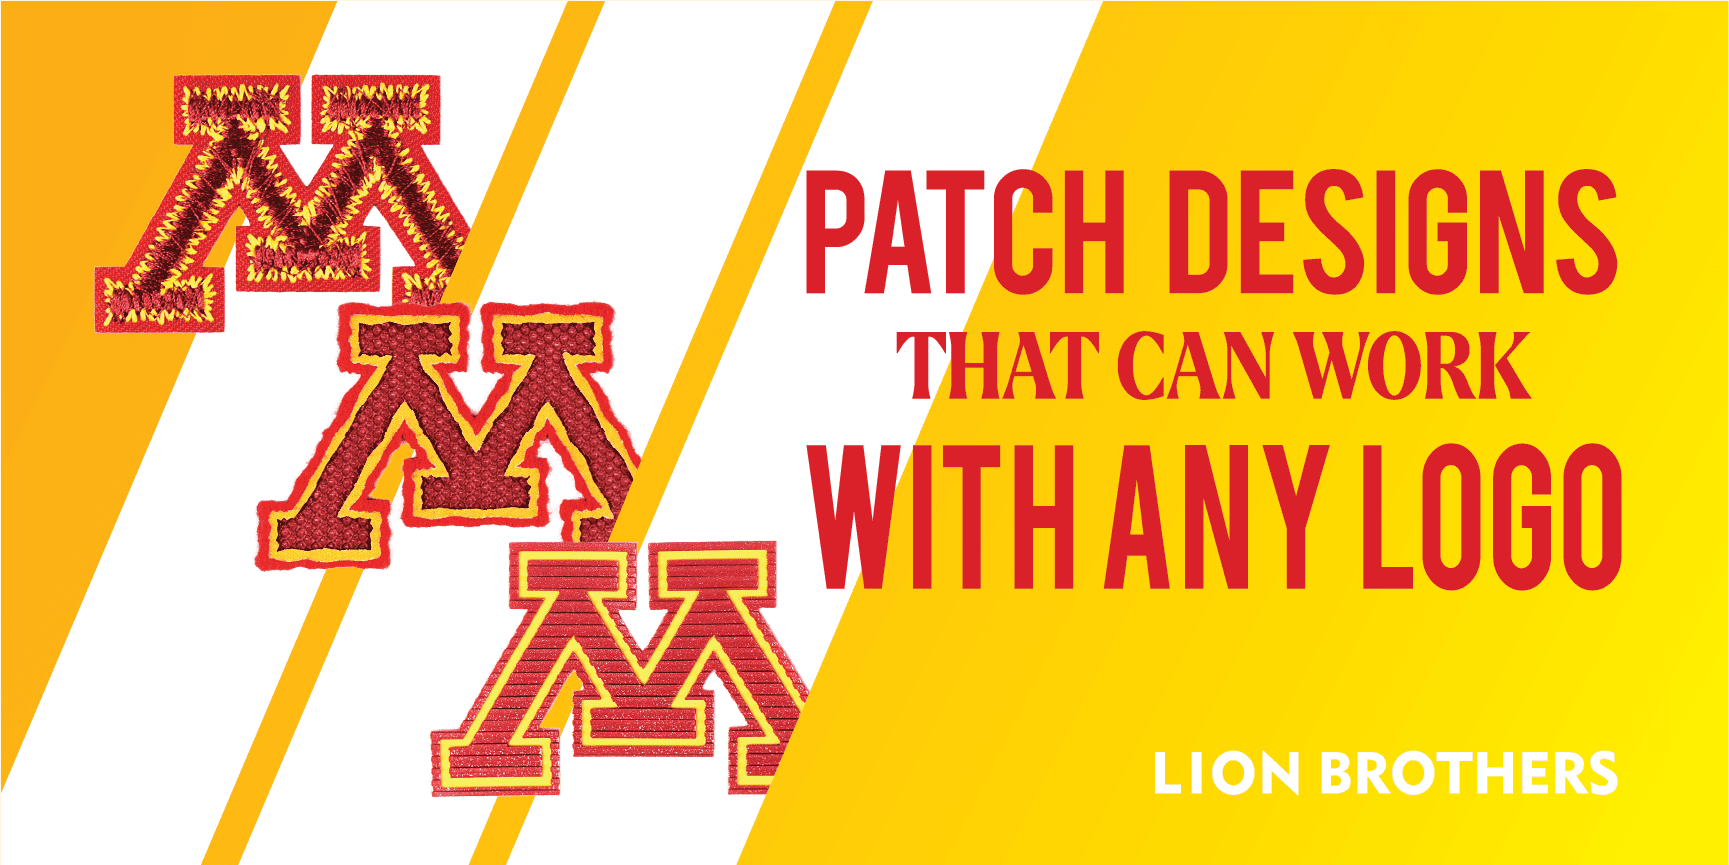 PATCH DESIGNS THAT CAN WORK WITH ANY LOGO